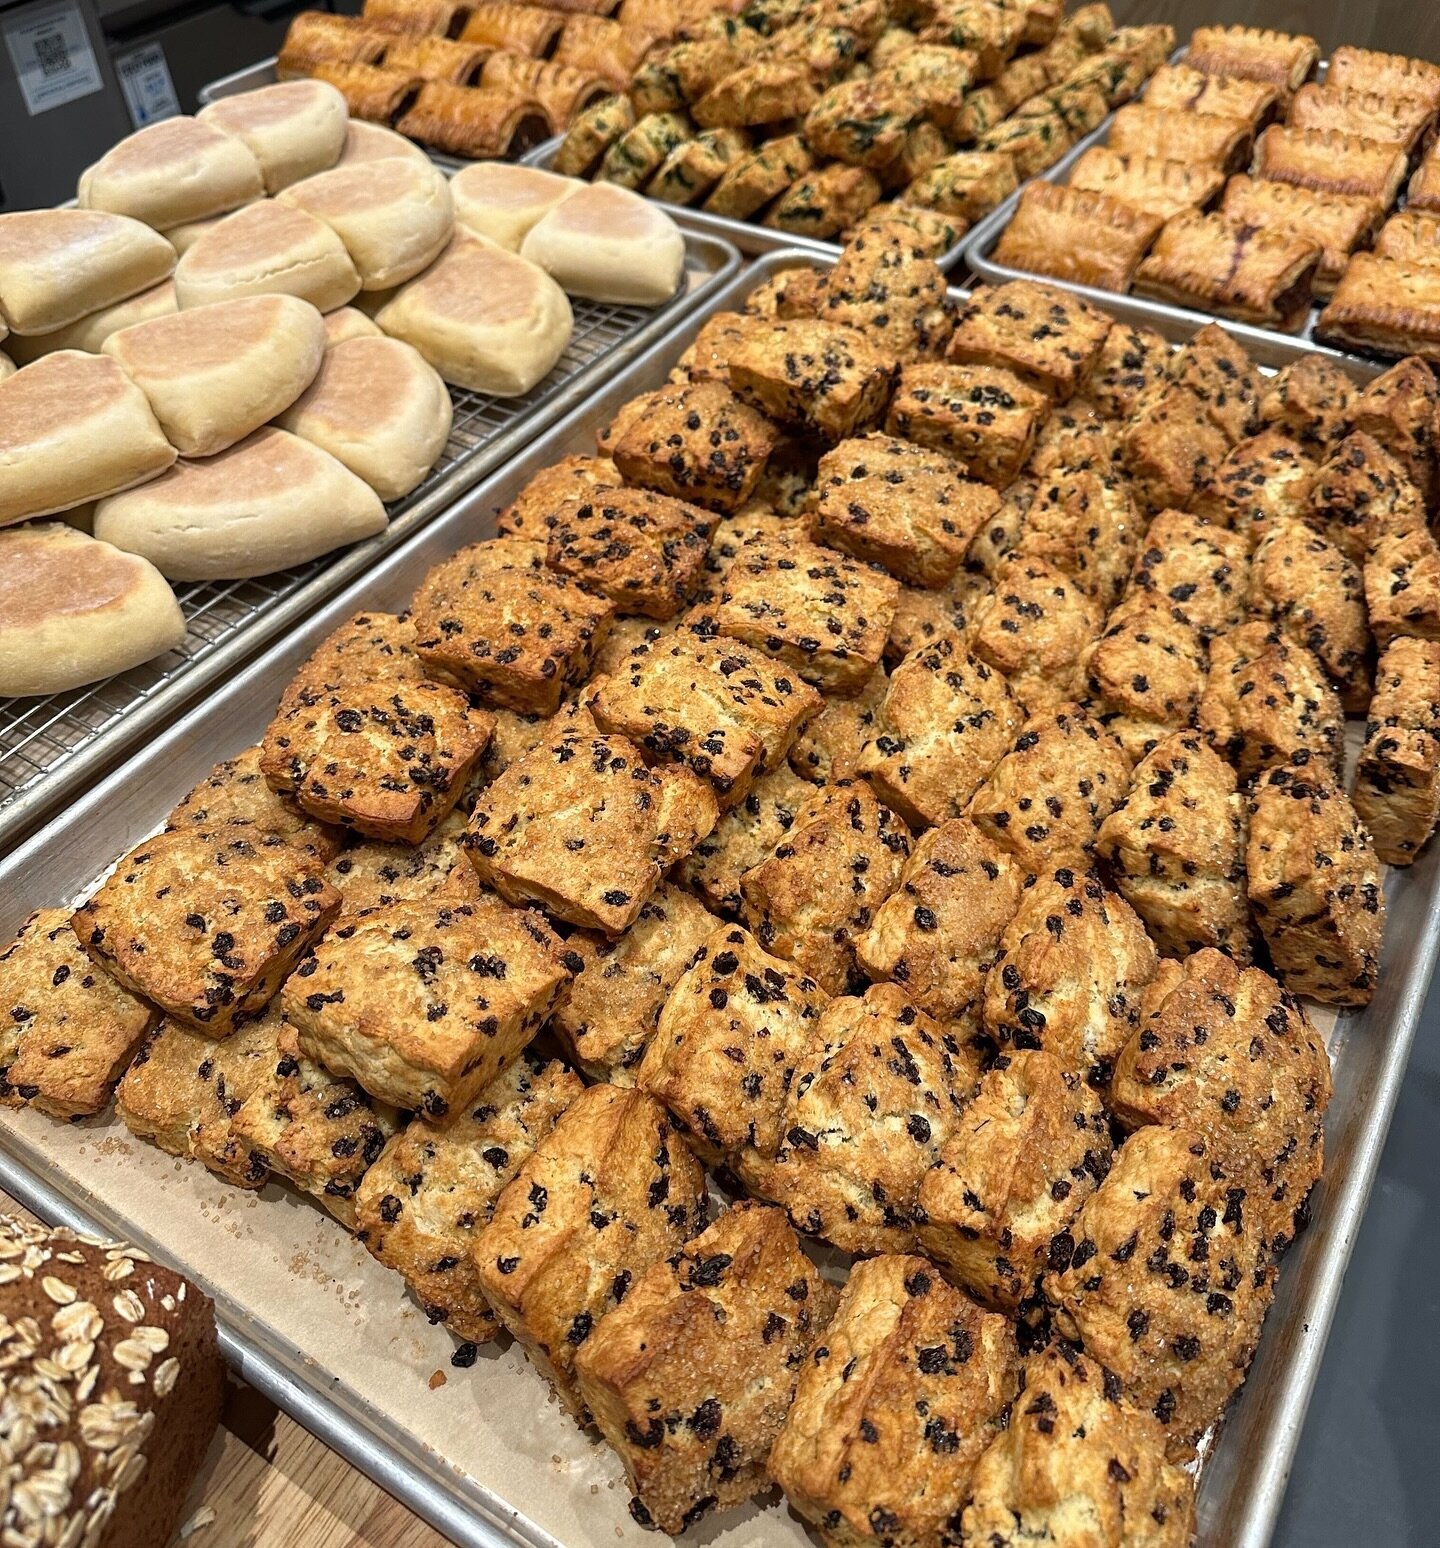 The bakery on Lawton Street is cranking out the soda bread this weekend and every day! 

See you all for green Snowy Plovers on St. Patrick&rsquo;s Day!